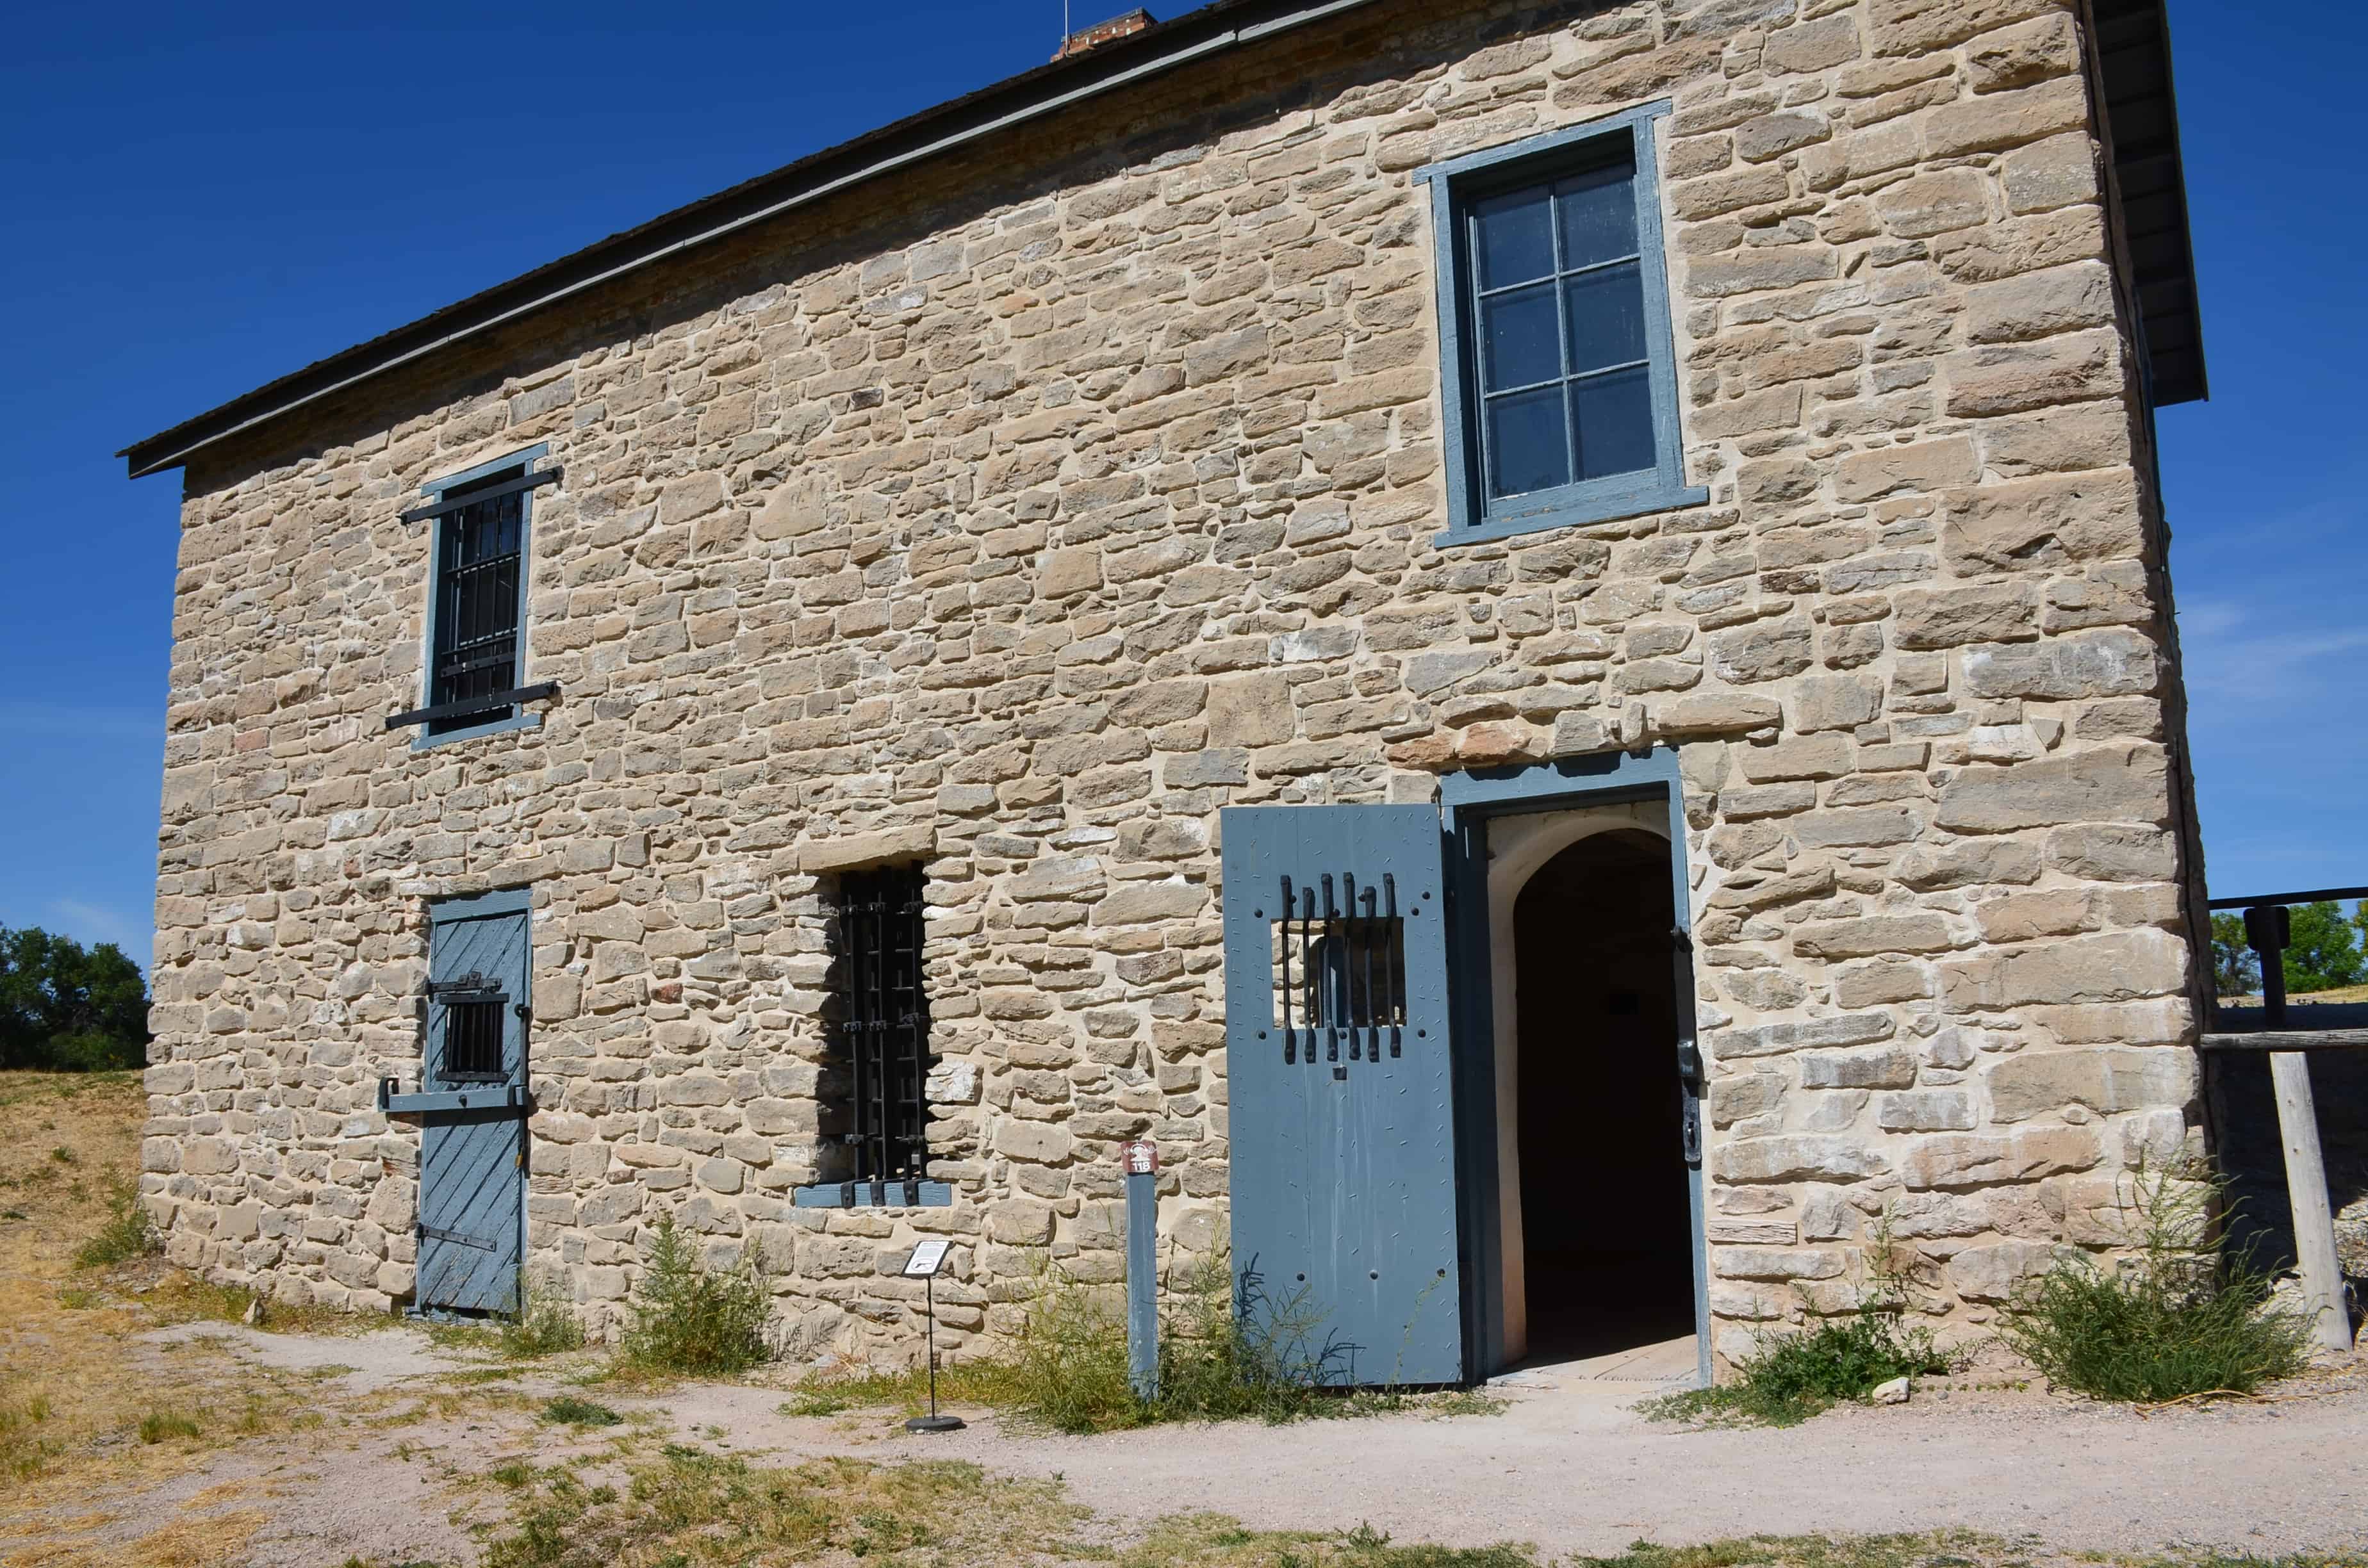 Old guardhouse at Fort Laramie National Historic Site in Wyoming